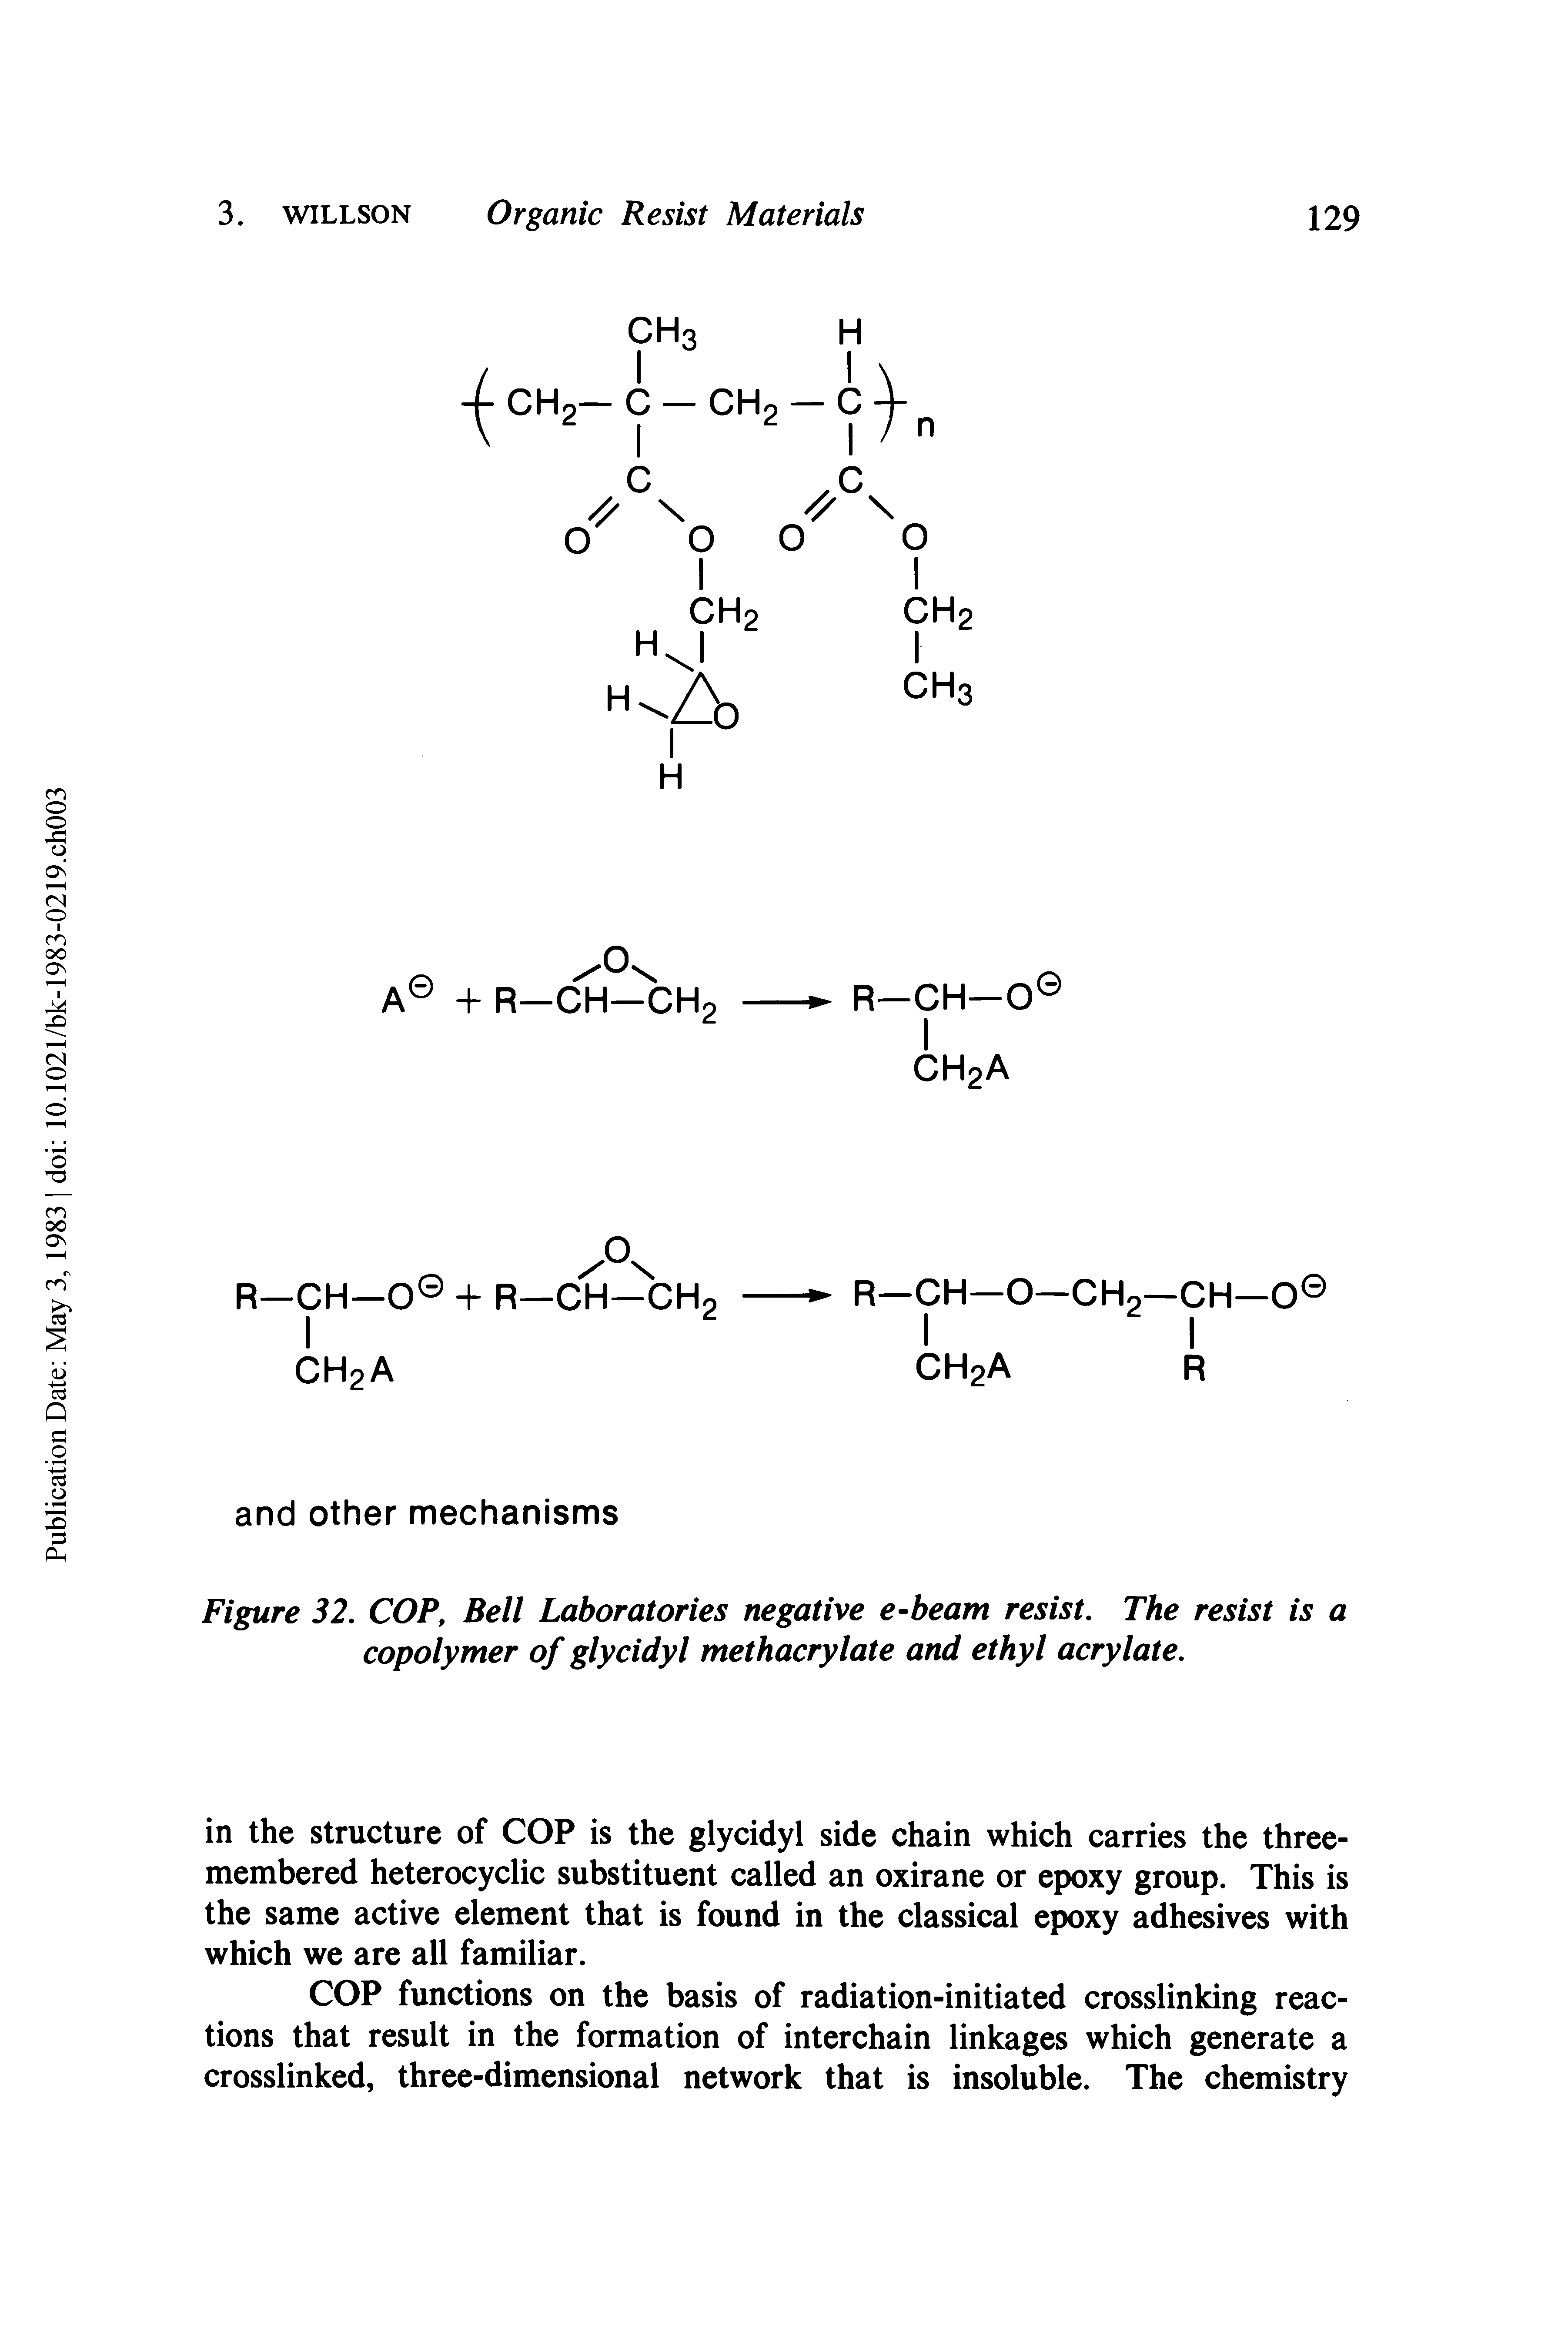 Figure 32. COP, Bell Laboratories negative e-beam resist. The resist is a copolymer of glycidyl methacrylate and ethyl acrylate.